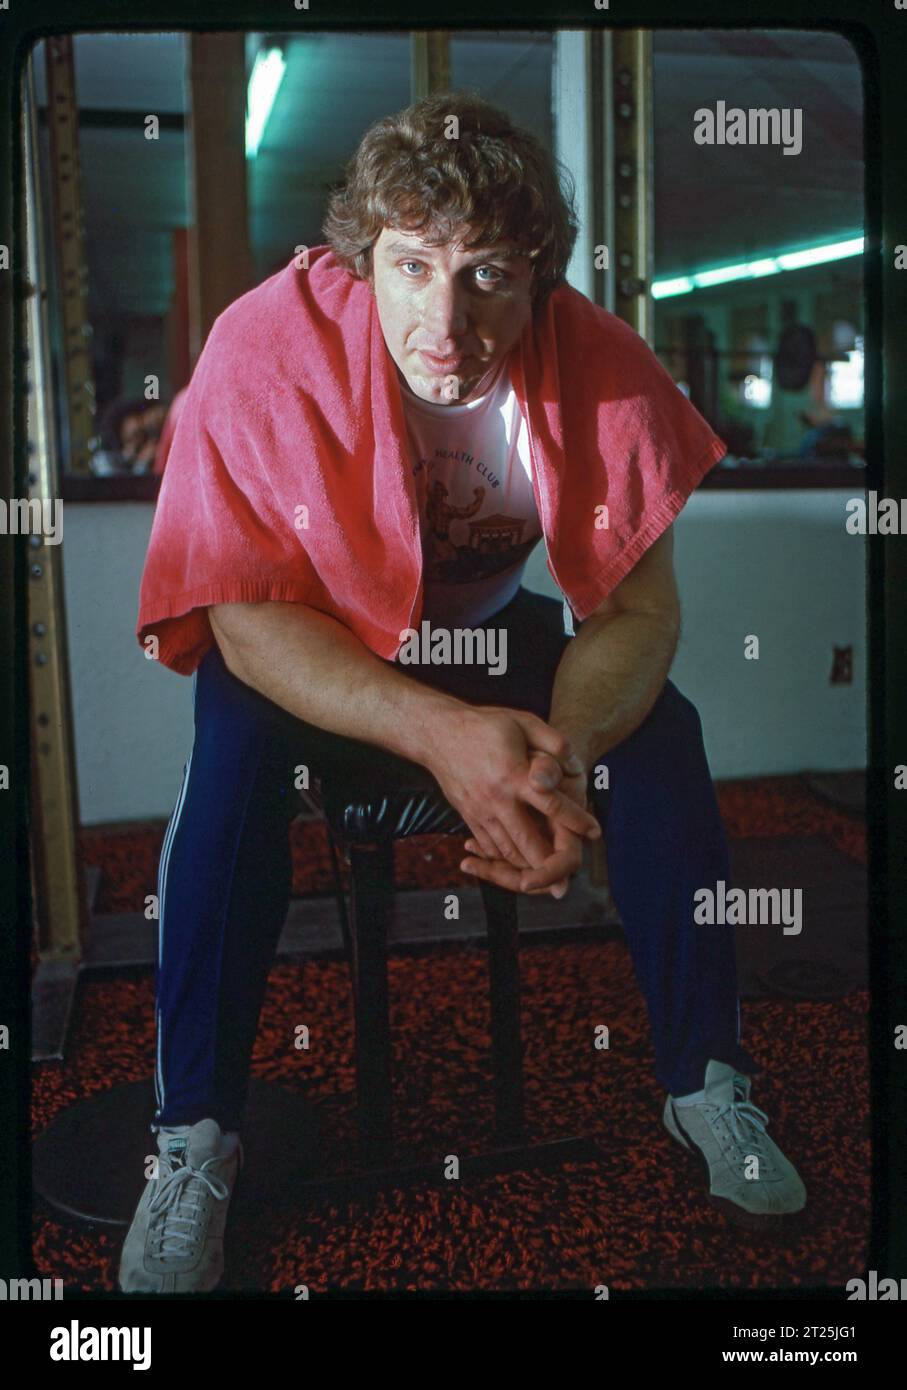 Four time olympic gold medalist Al Oerter cools off after a weight lifting workout at a gym in Long Island. He won his medals in the discuss throwing events and is one of the greatest Olympians in American history, Stock Photo